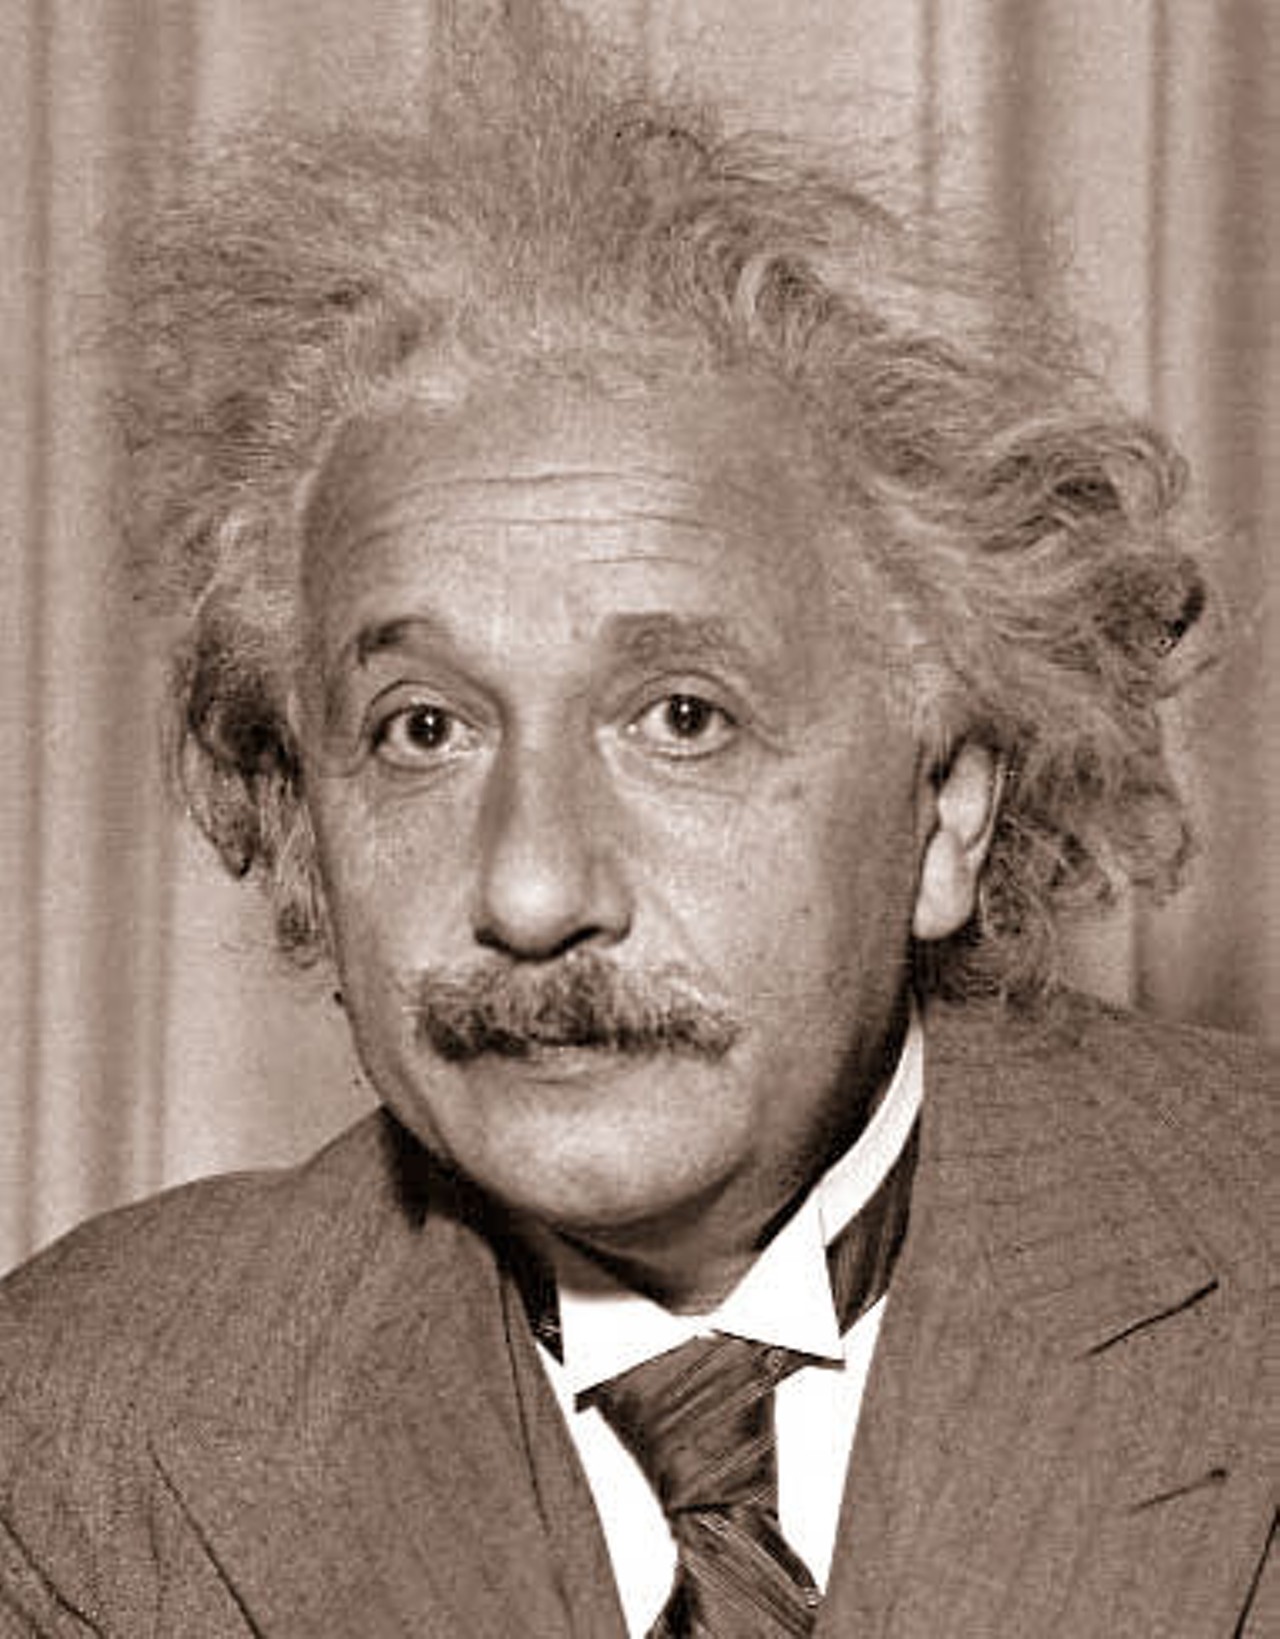 One of the most famous mustaches, that of Albert Einstein.